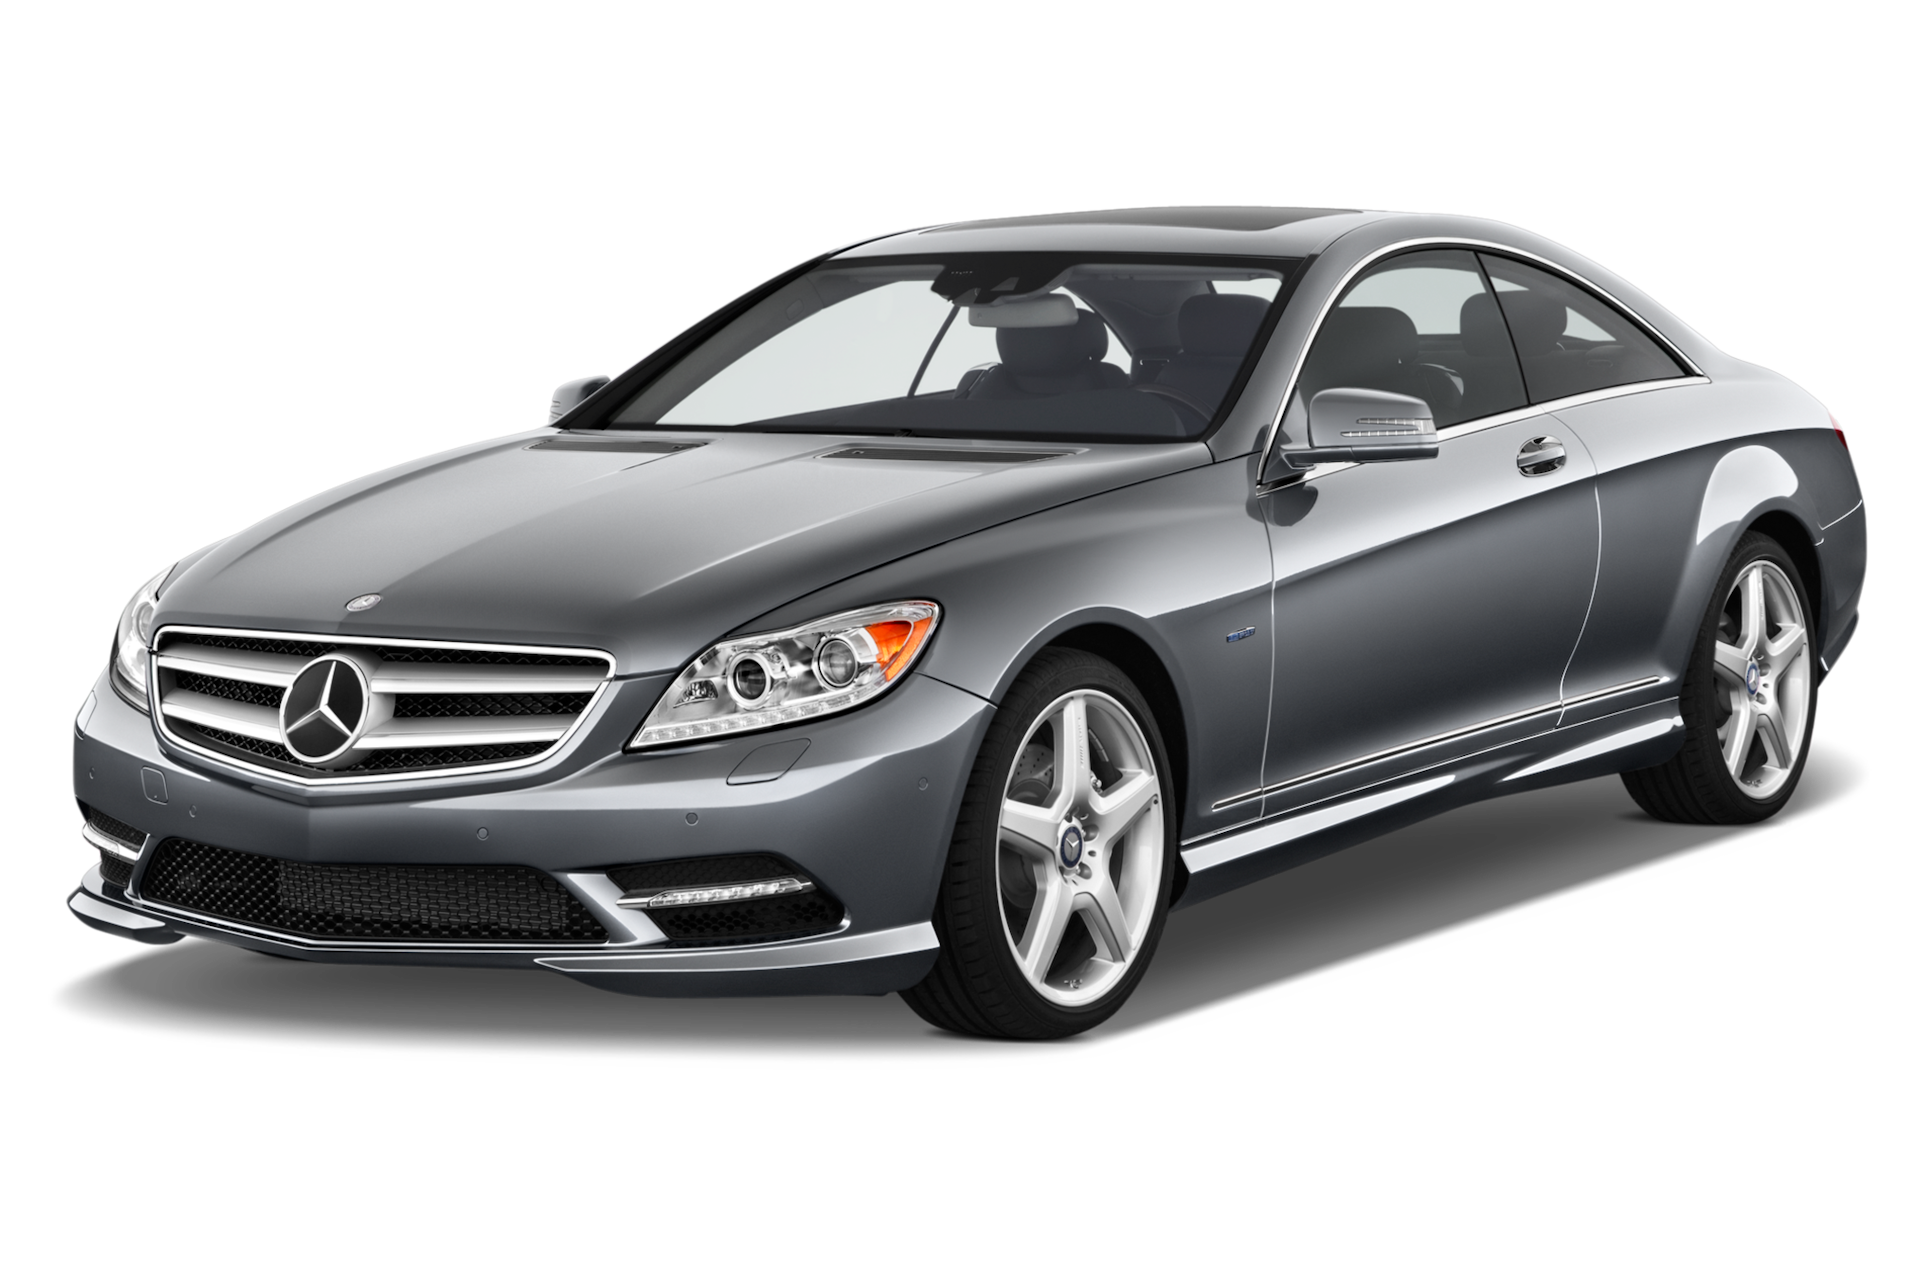 2012 Mercedes-Benz CL-Class Prices, Reviews, and Photos - MotorTrend